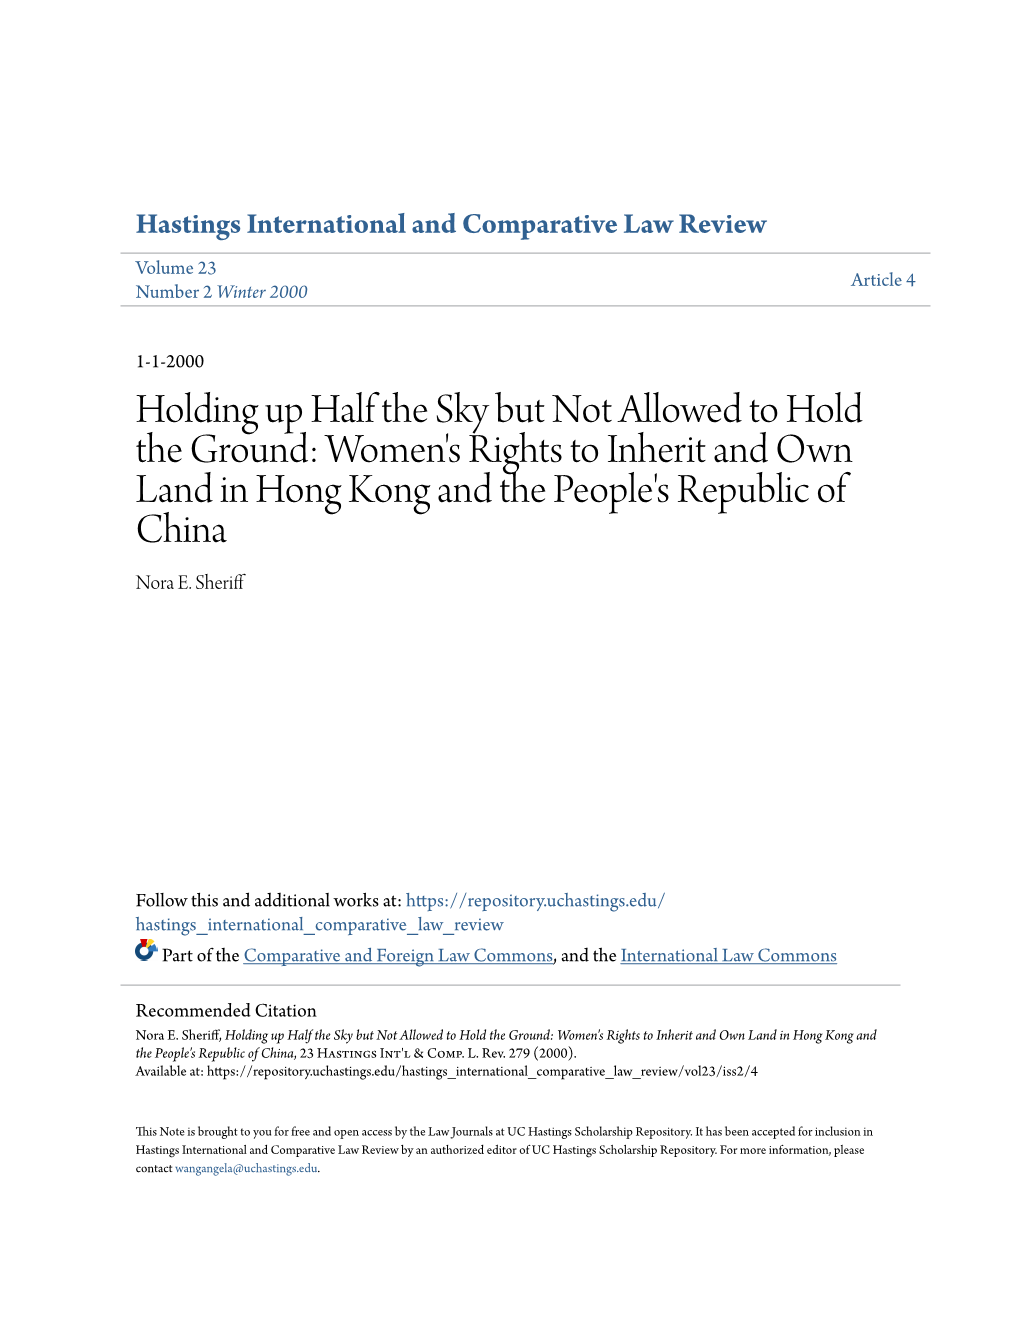 Women's Rights to Inherit and Own Land in Hong Kong and the People's Republic of China Nora E